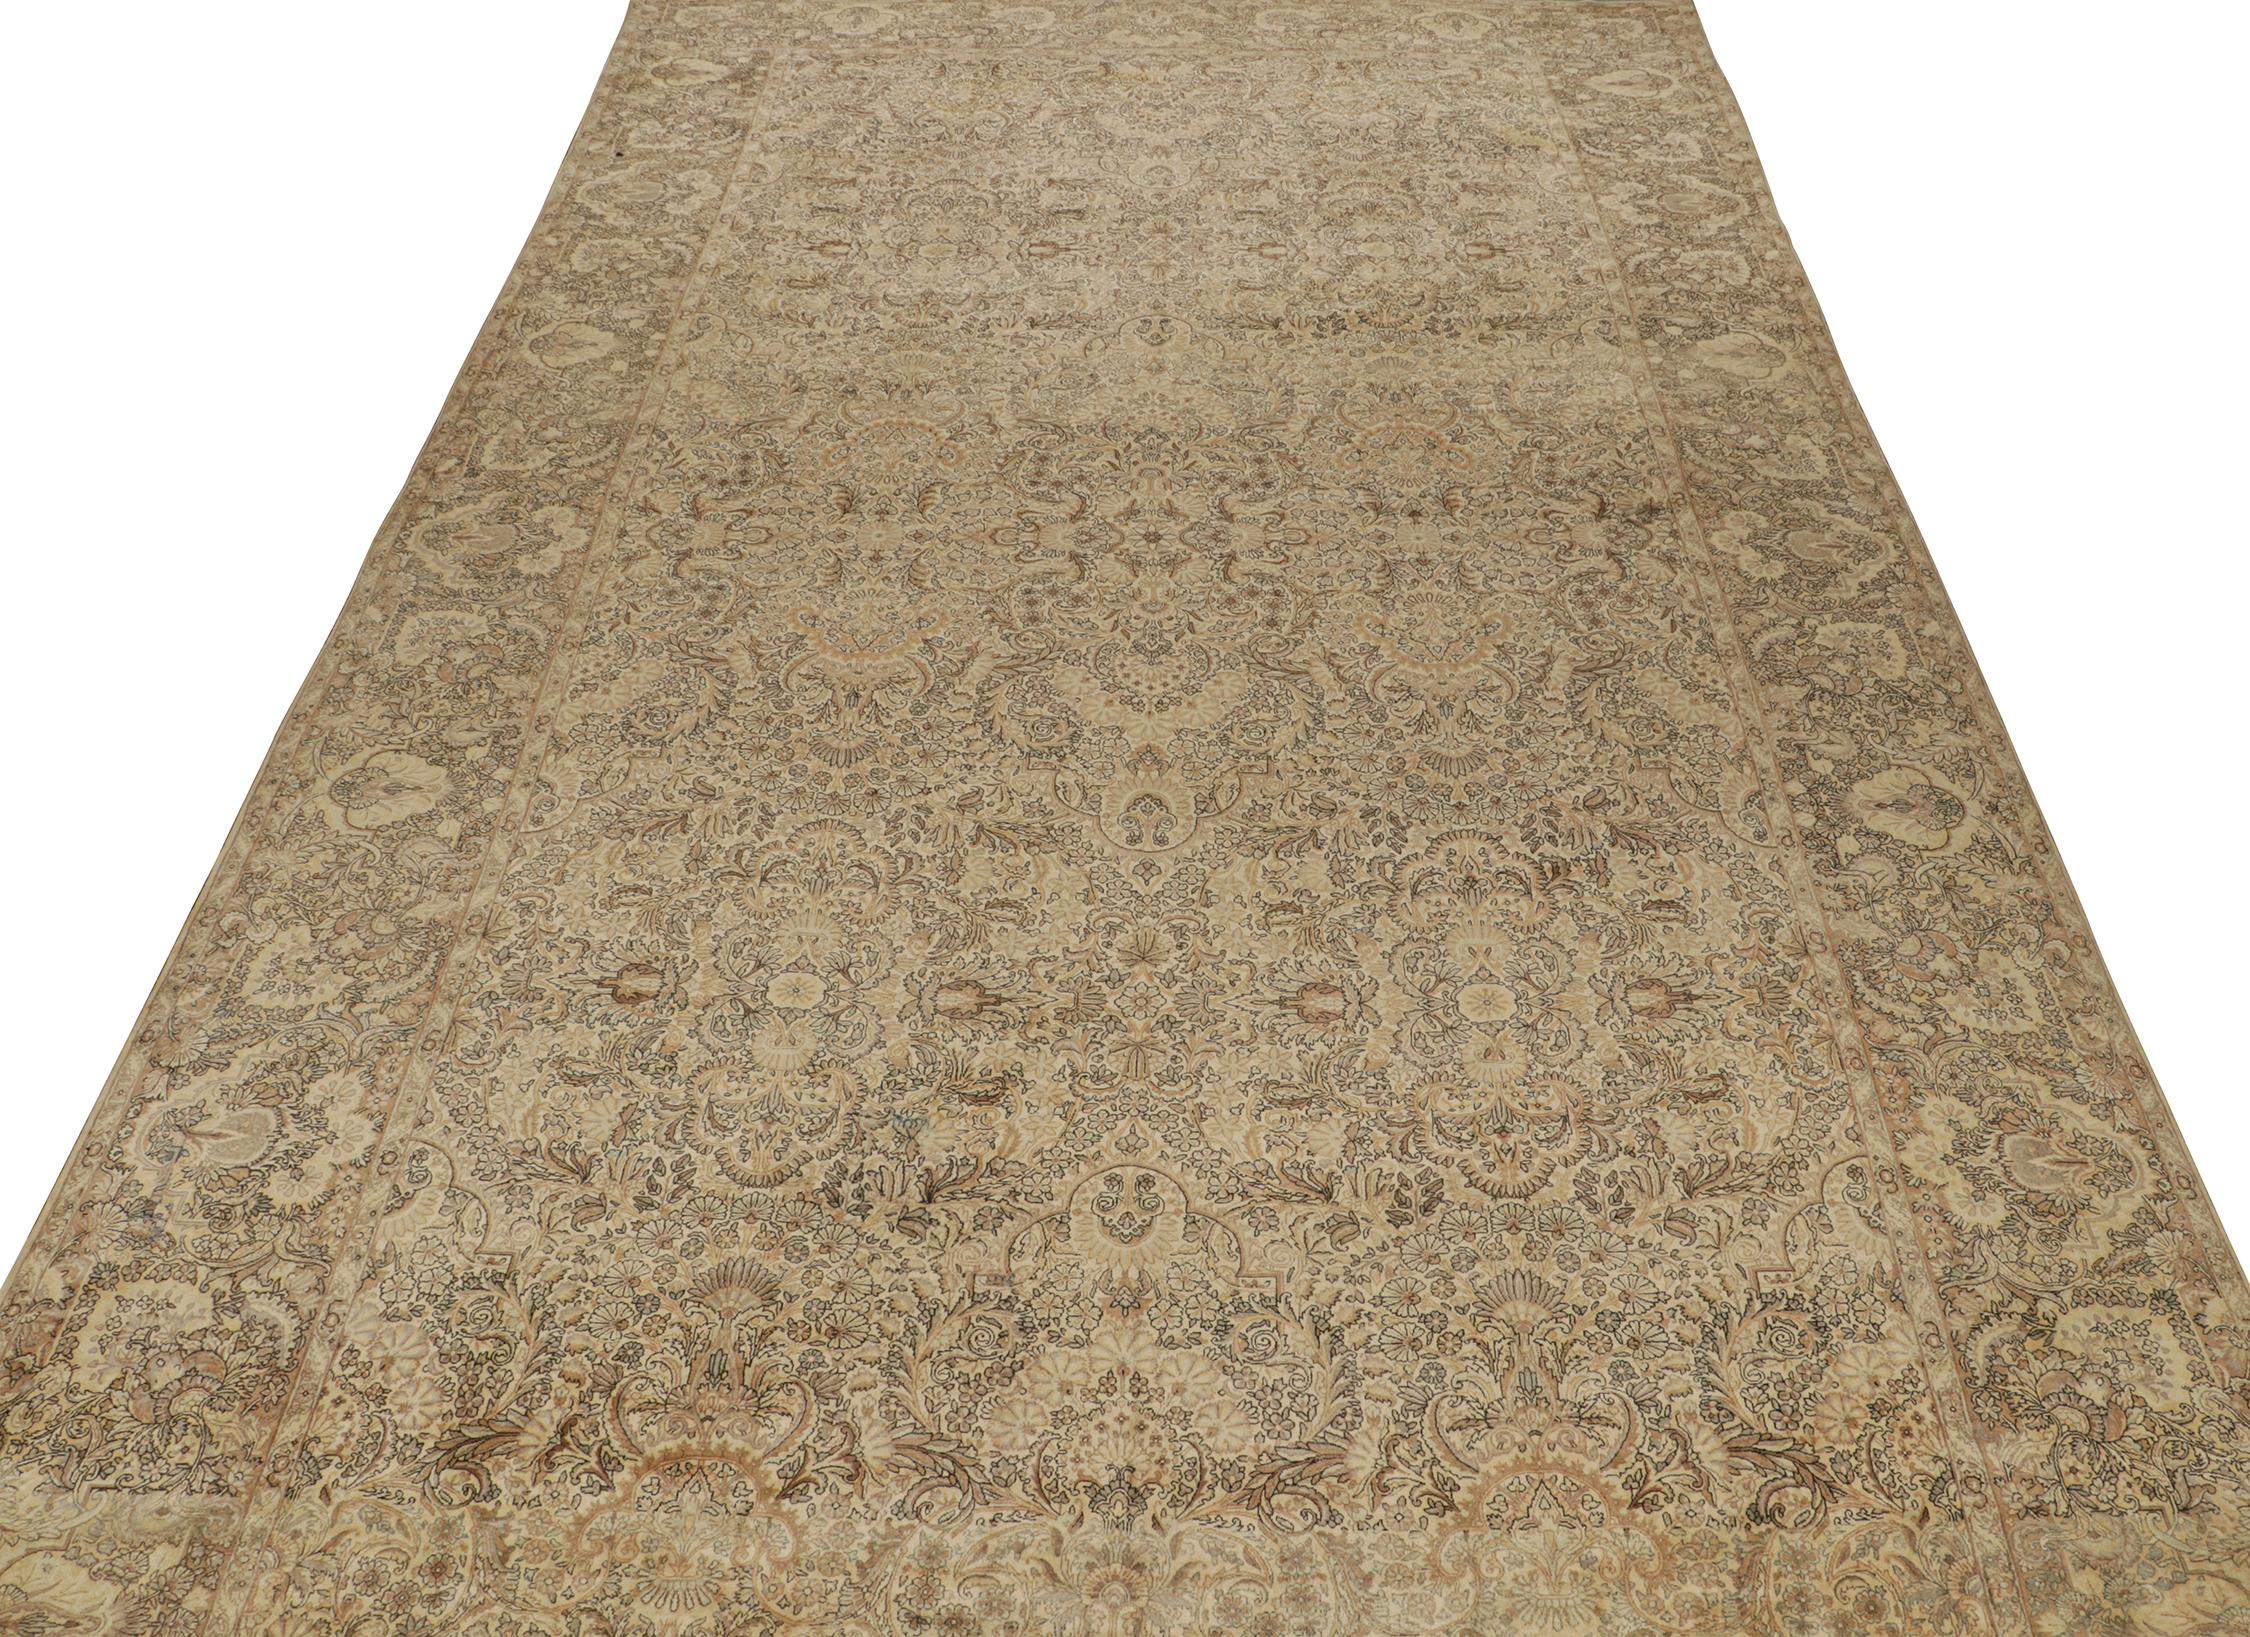 An antique 12x21 Persian Kerman rug, hand-knotted in wool circa 1920s.

Further On the Design:

This antique piece is a royal selection that enjoys patterns in beige and gold, deliciously punctuated by ice blue and black details. Keen eyes will